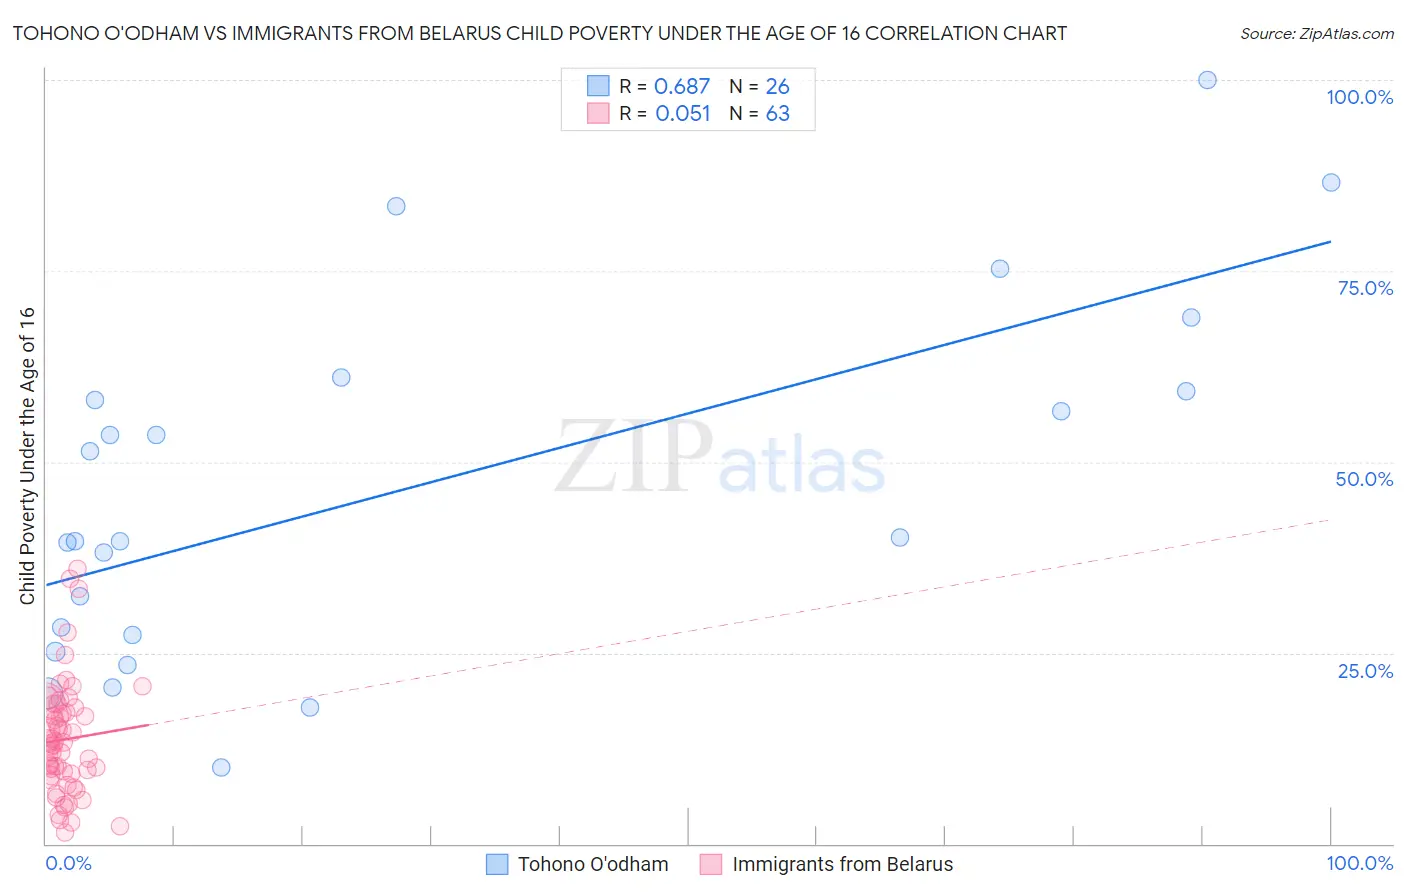 Tohono O'odham vs Immigrants from Belarus Child Poverty Under the Age of 16